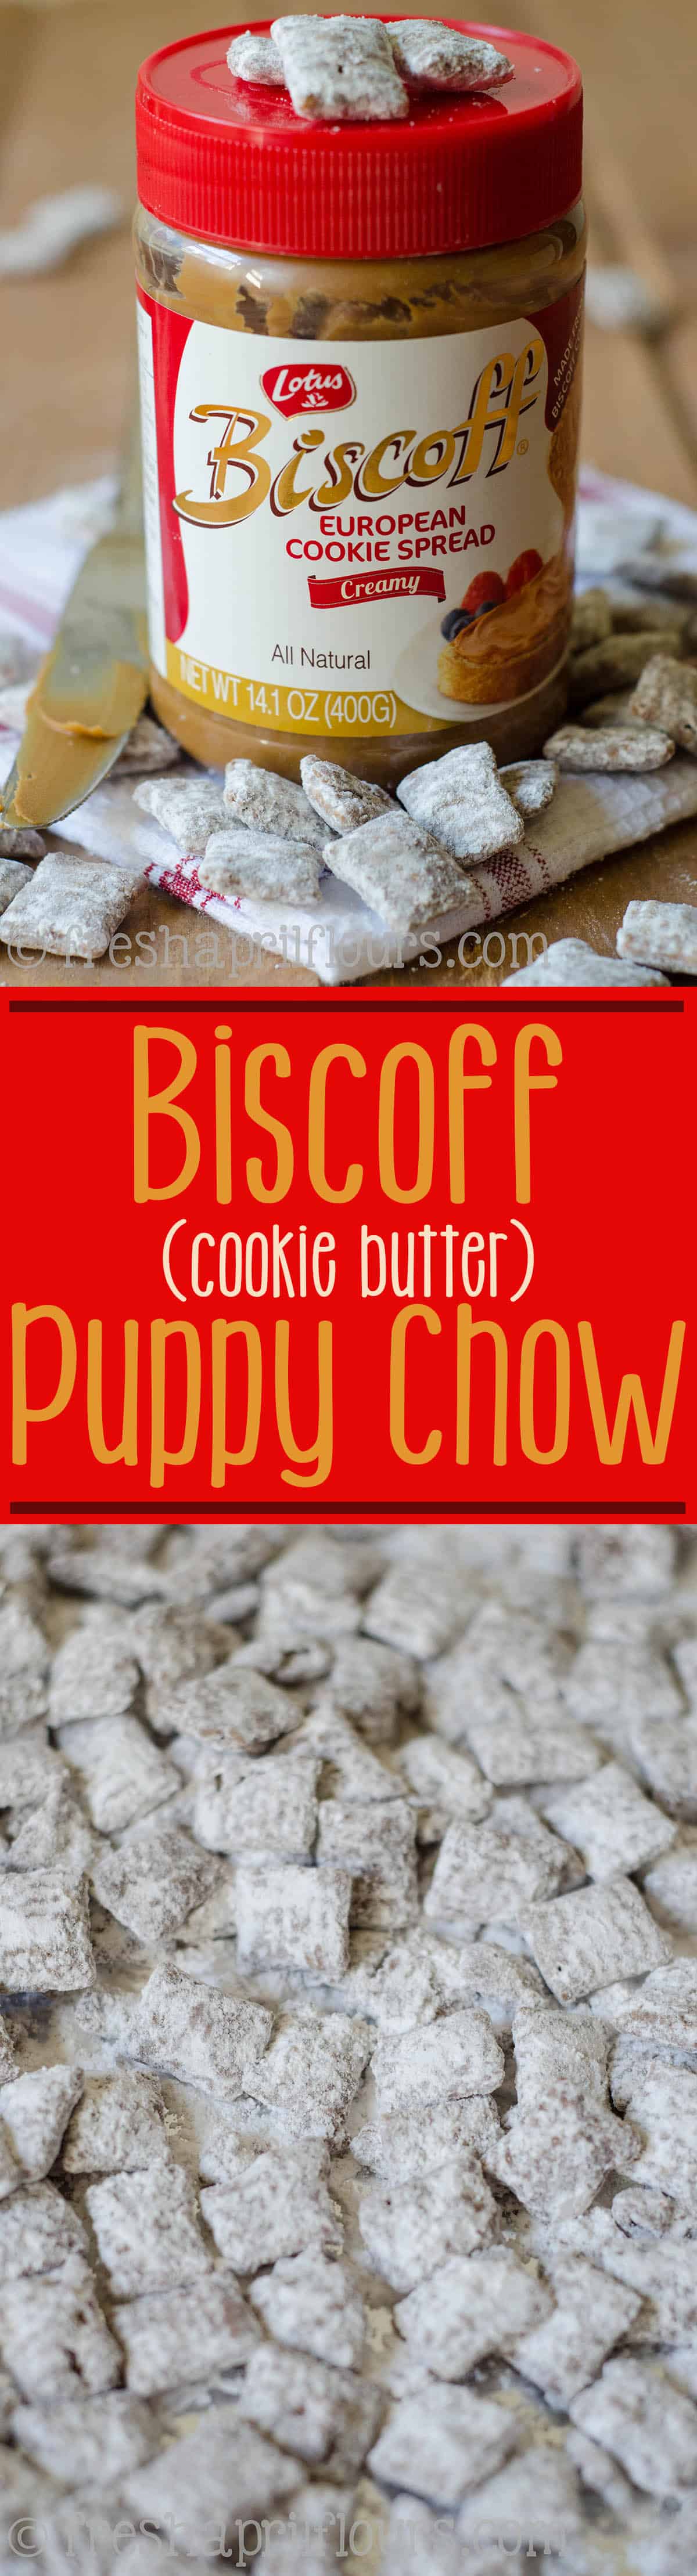 An easy recipe for puppy chow made with Biscoff cookie spread. via @frshaprilflours